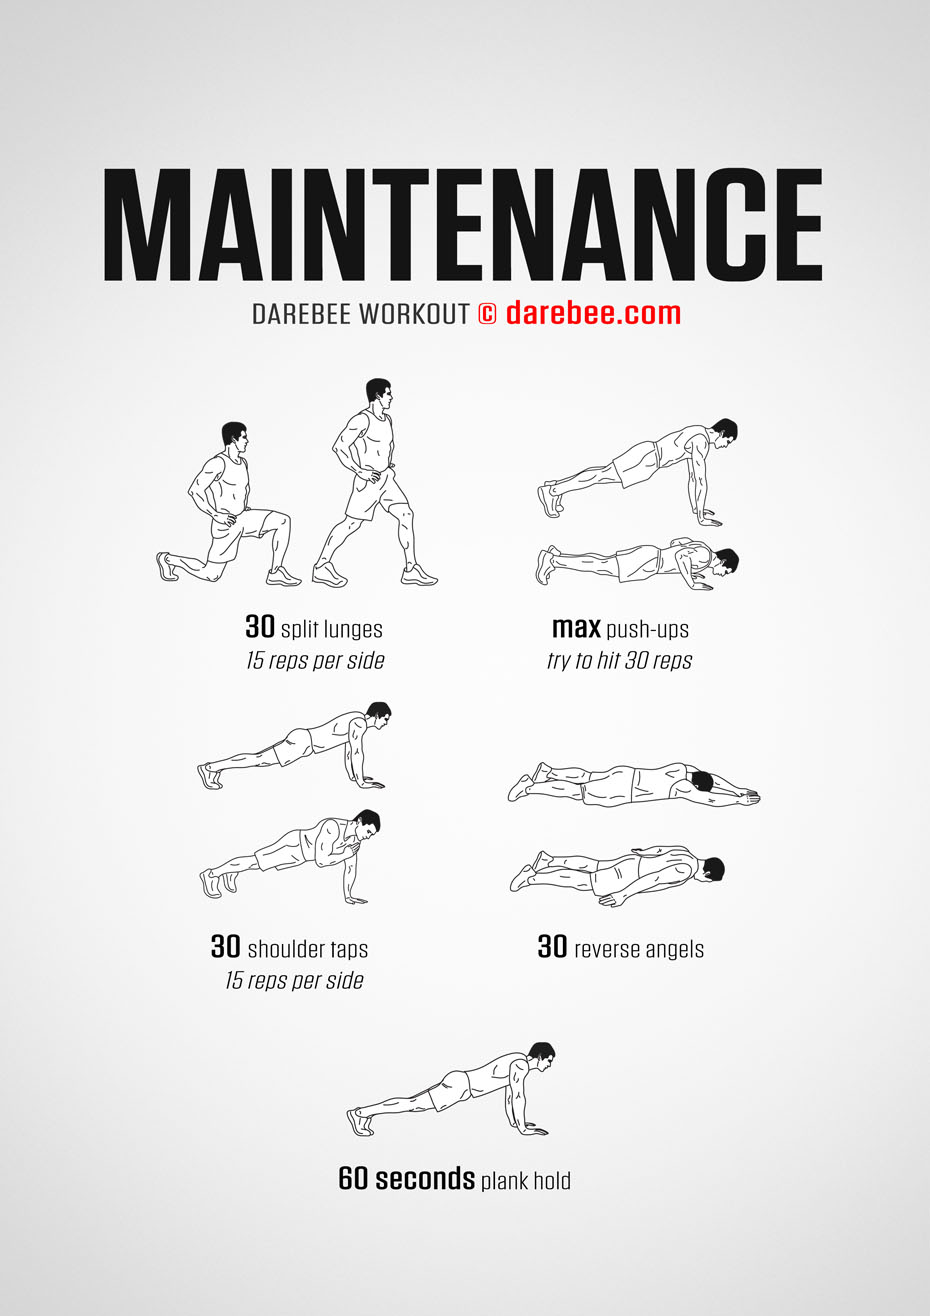 Maintenance is a DAREBEE home fitness no-equipment, total body workout that takes approximately five minutes to complete and will help you maintain your fitness.